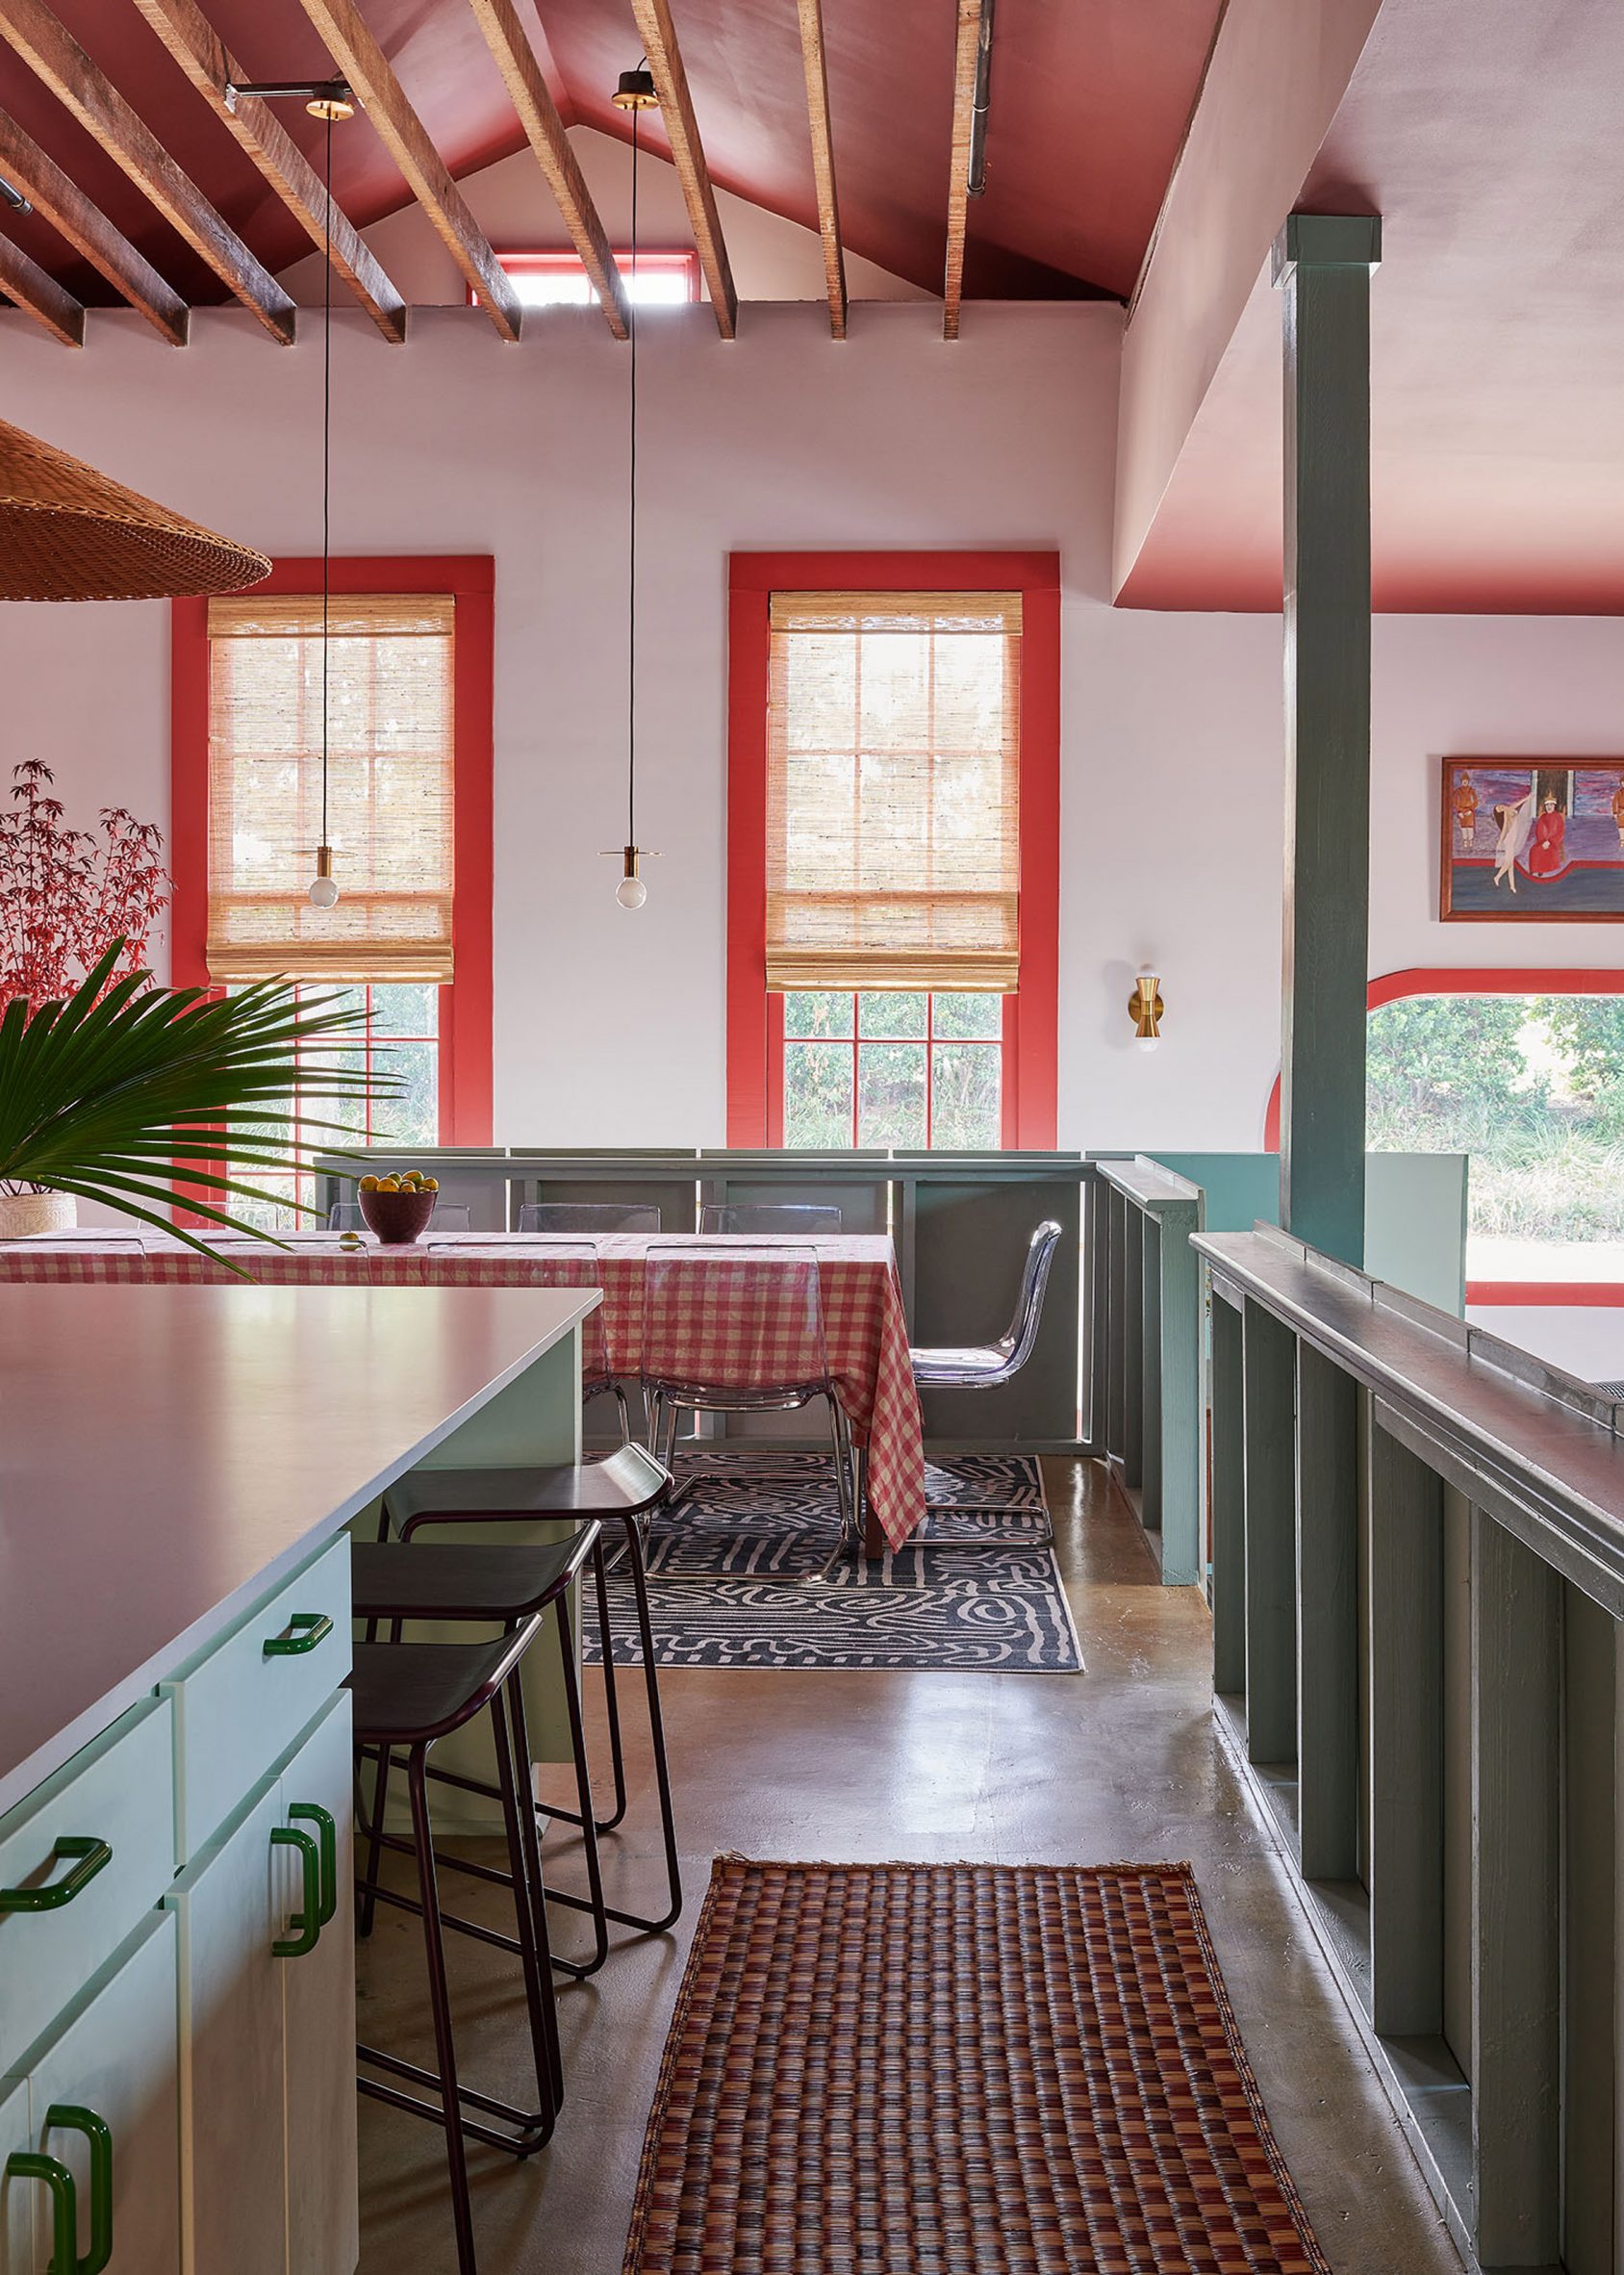 View from green kitchen to red-painted window frames